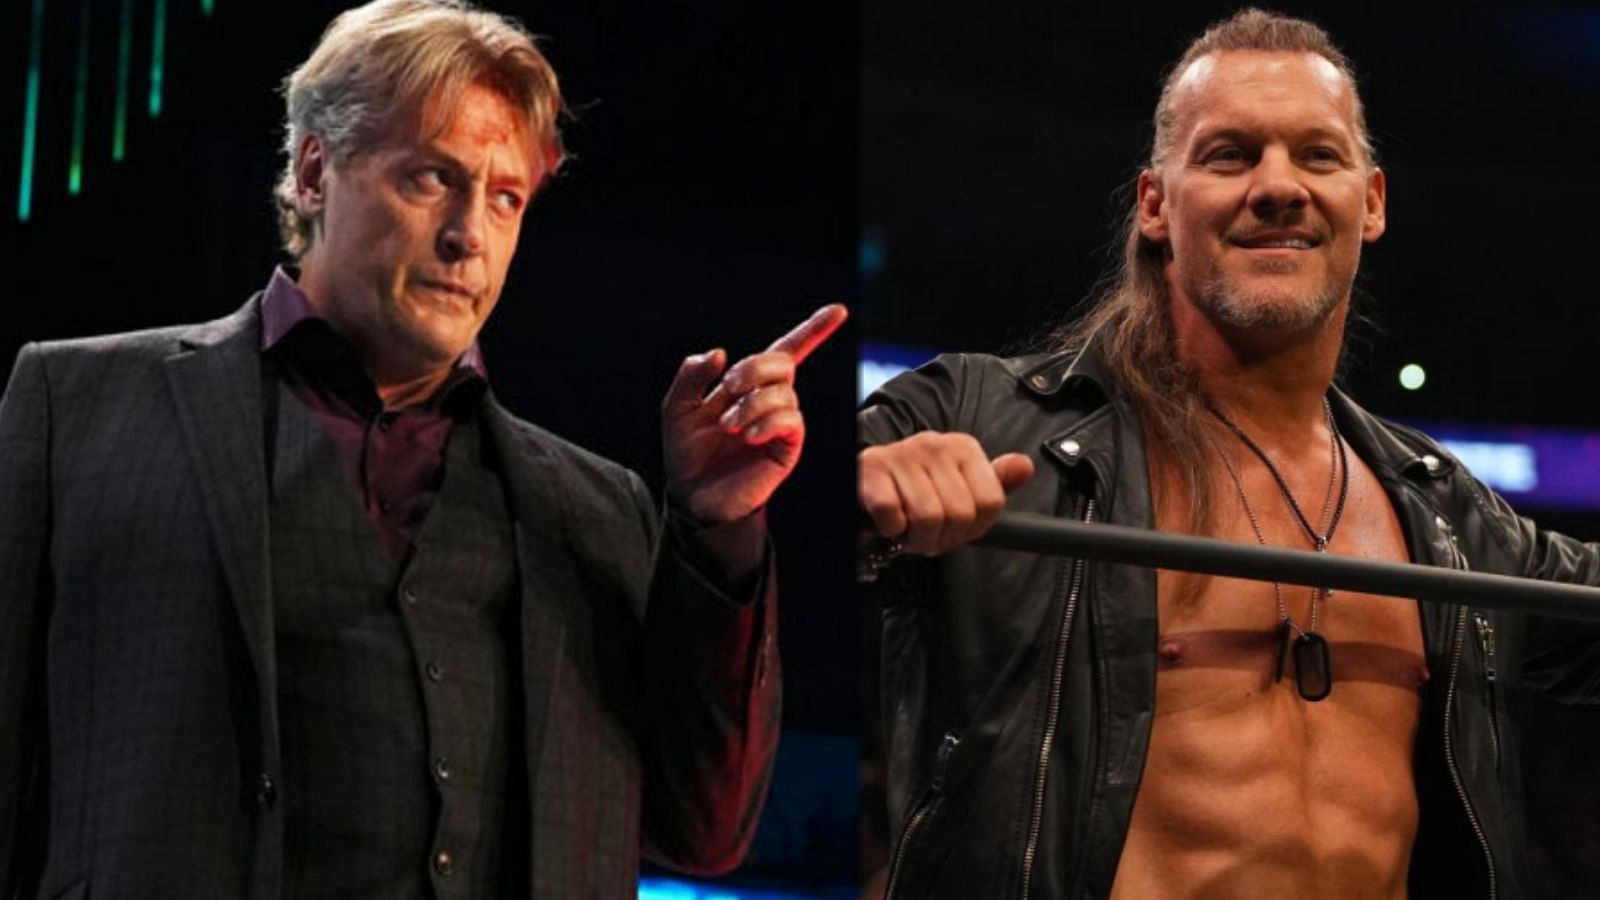 The two former WWE/WCW veterans have come clashing in AEW.